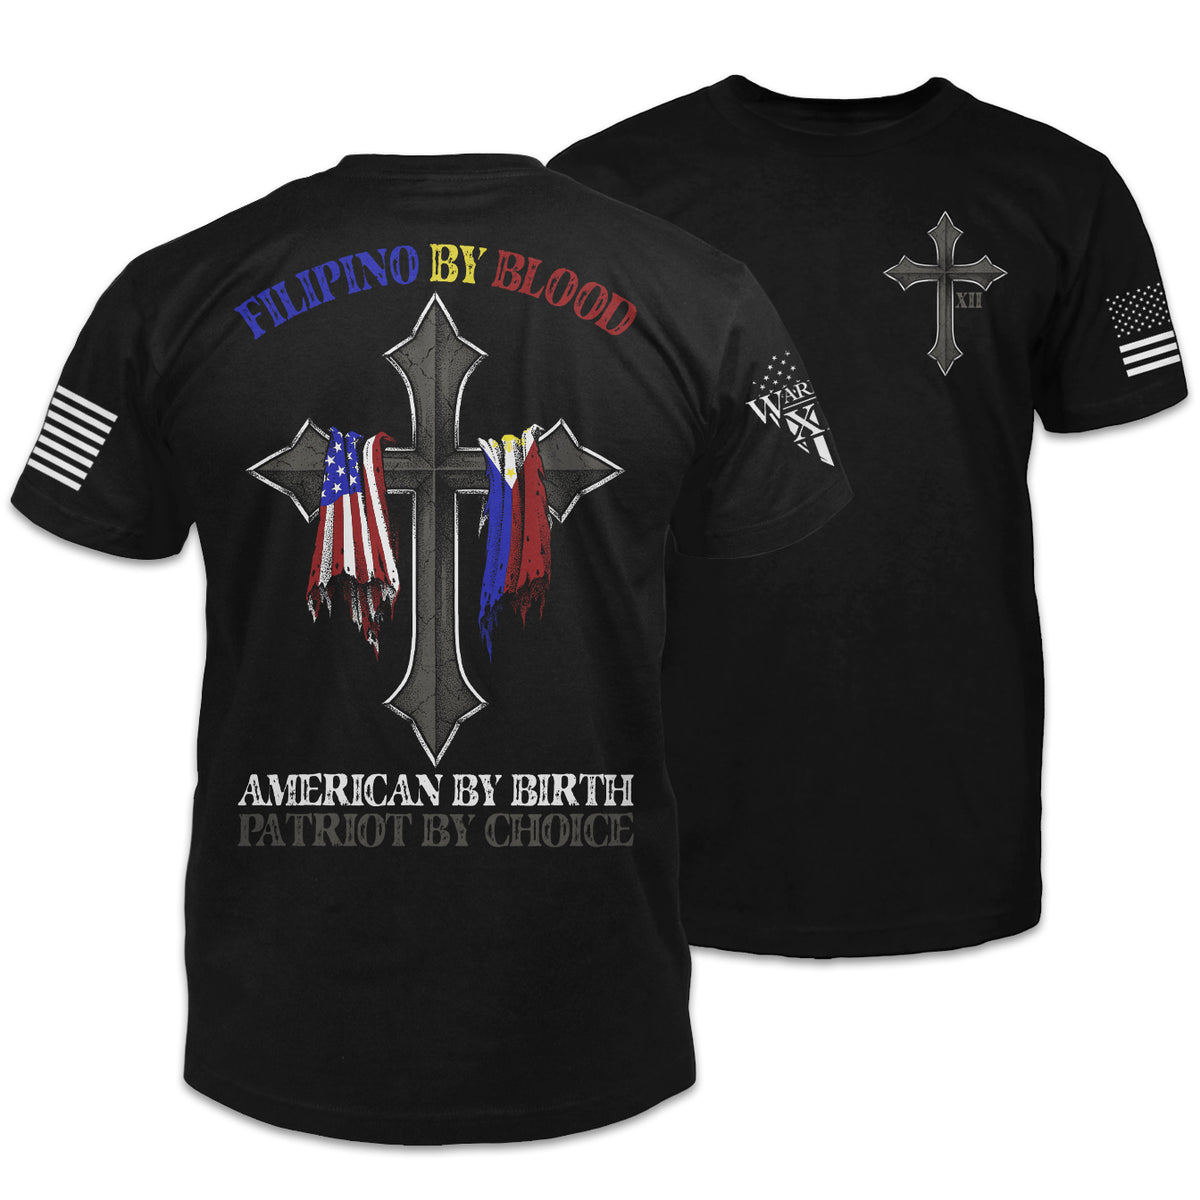 Front & back black t-shirt with the words "Filipino by blood, American by birth, patriot by choice" with a cross holding the US & Filipino flag printed on the shirt.